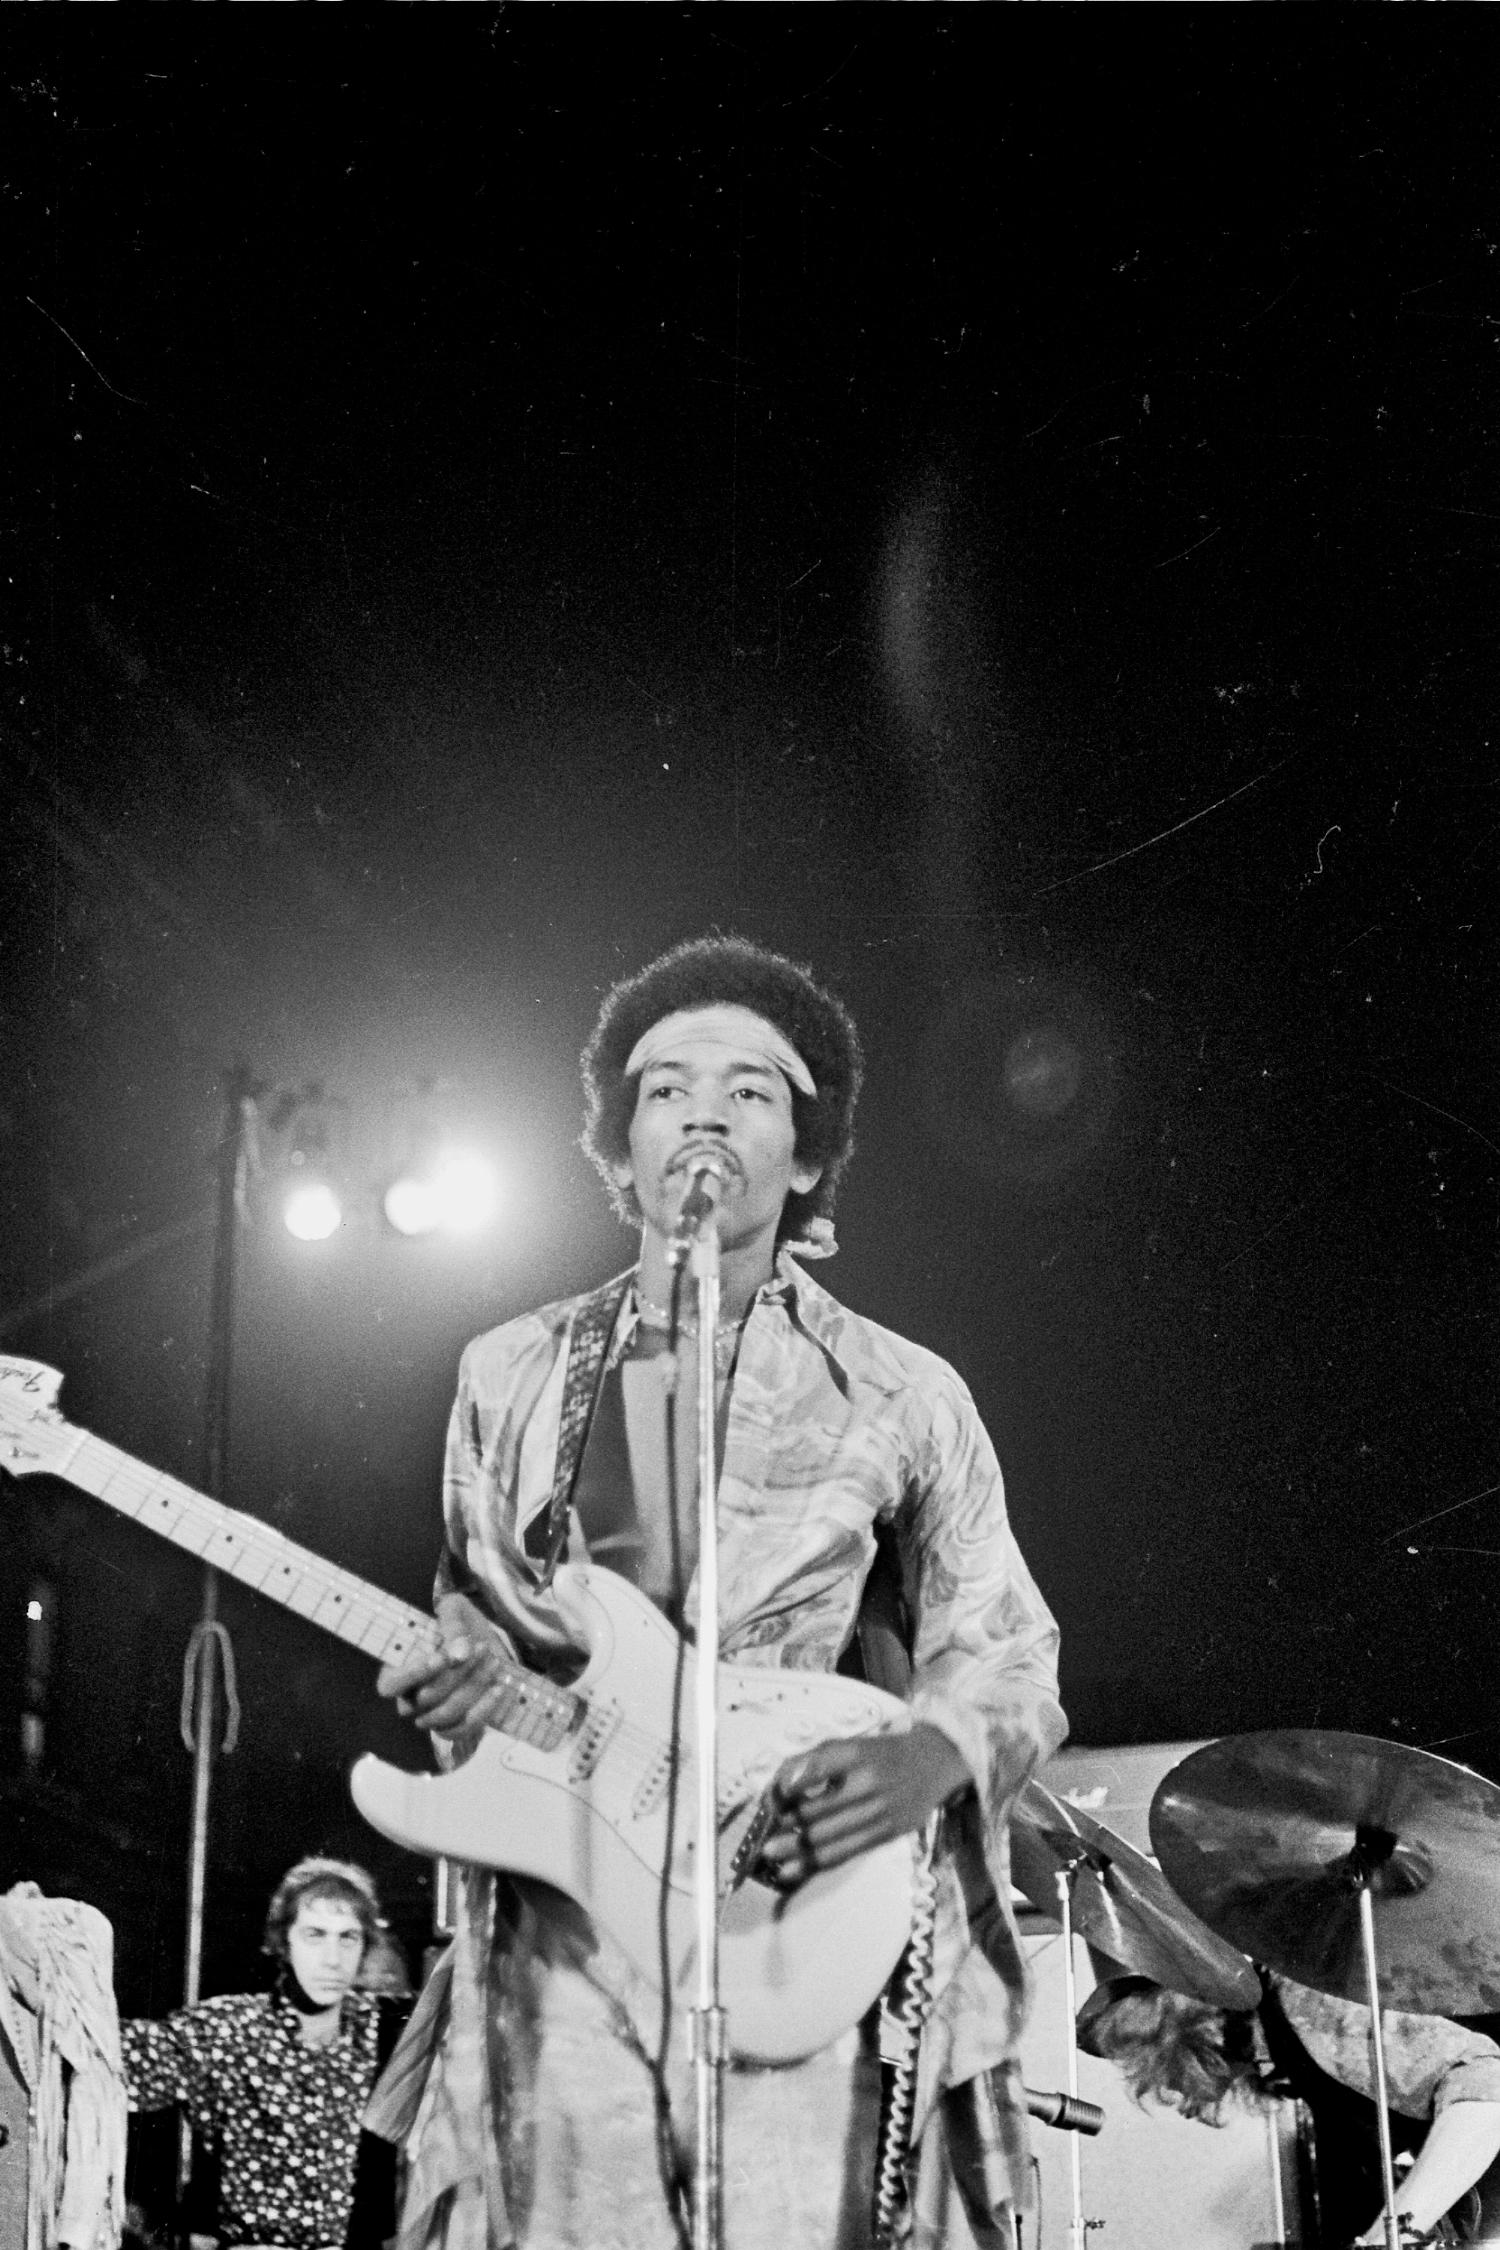 Grant Harper Reid Black and White Photograph - Jimi Hendrix Performing on Stage Looking Up Fine Art Print